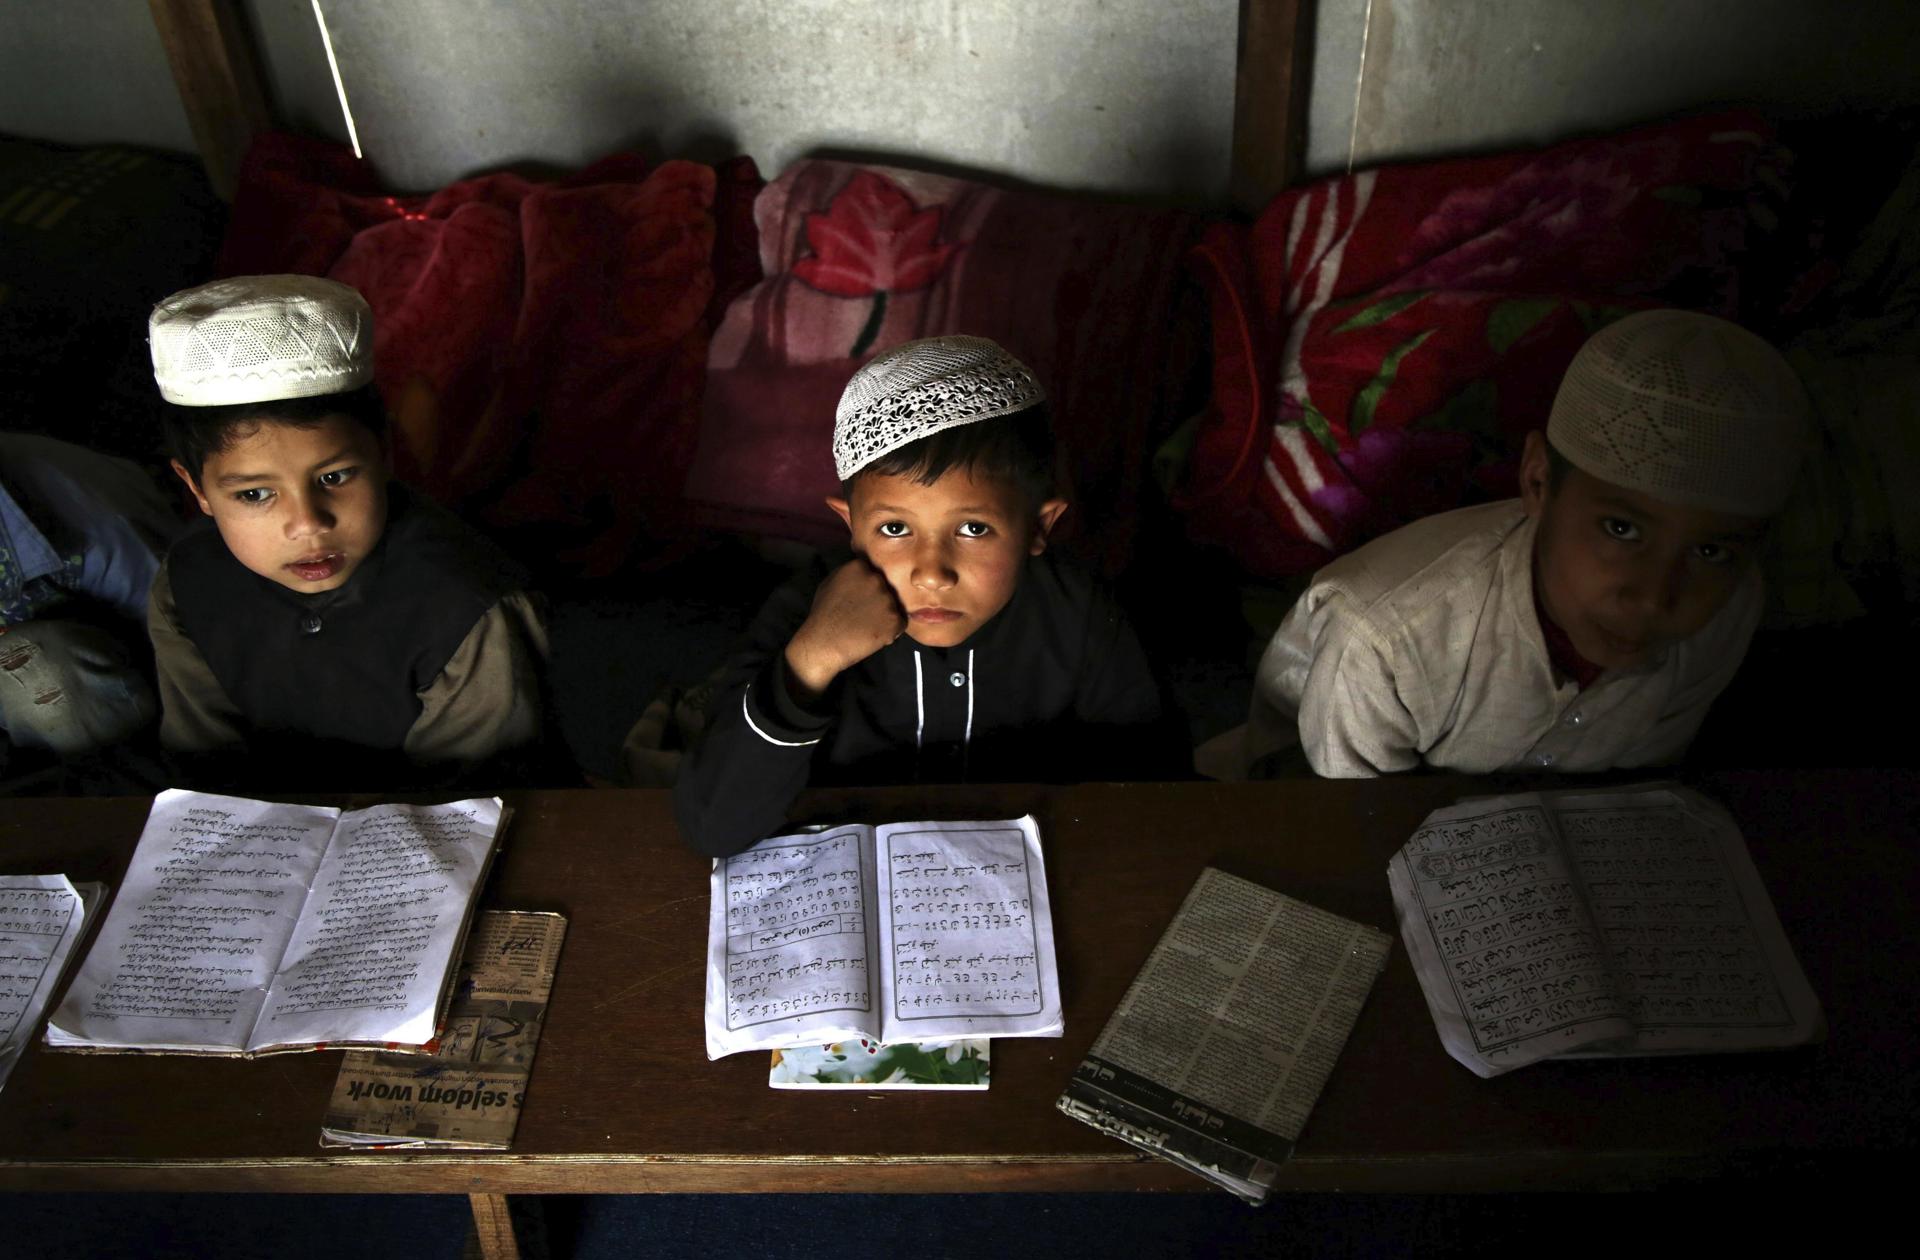 Rohingya Muslim boys from Myanmar study at the Madrasa, or Muslim religious school, at a refugee camp on the outskirts of Jammu, the winter capital of Kashmir, India, 21 February 2017. EFE-EPA/FILE/JAIPAL SINGH